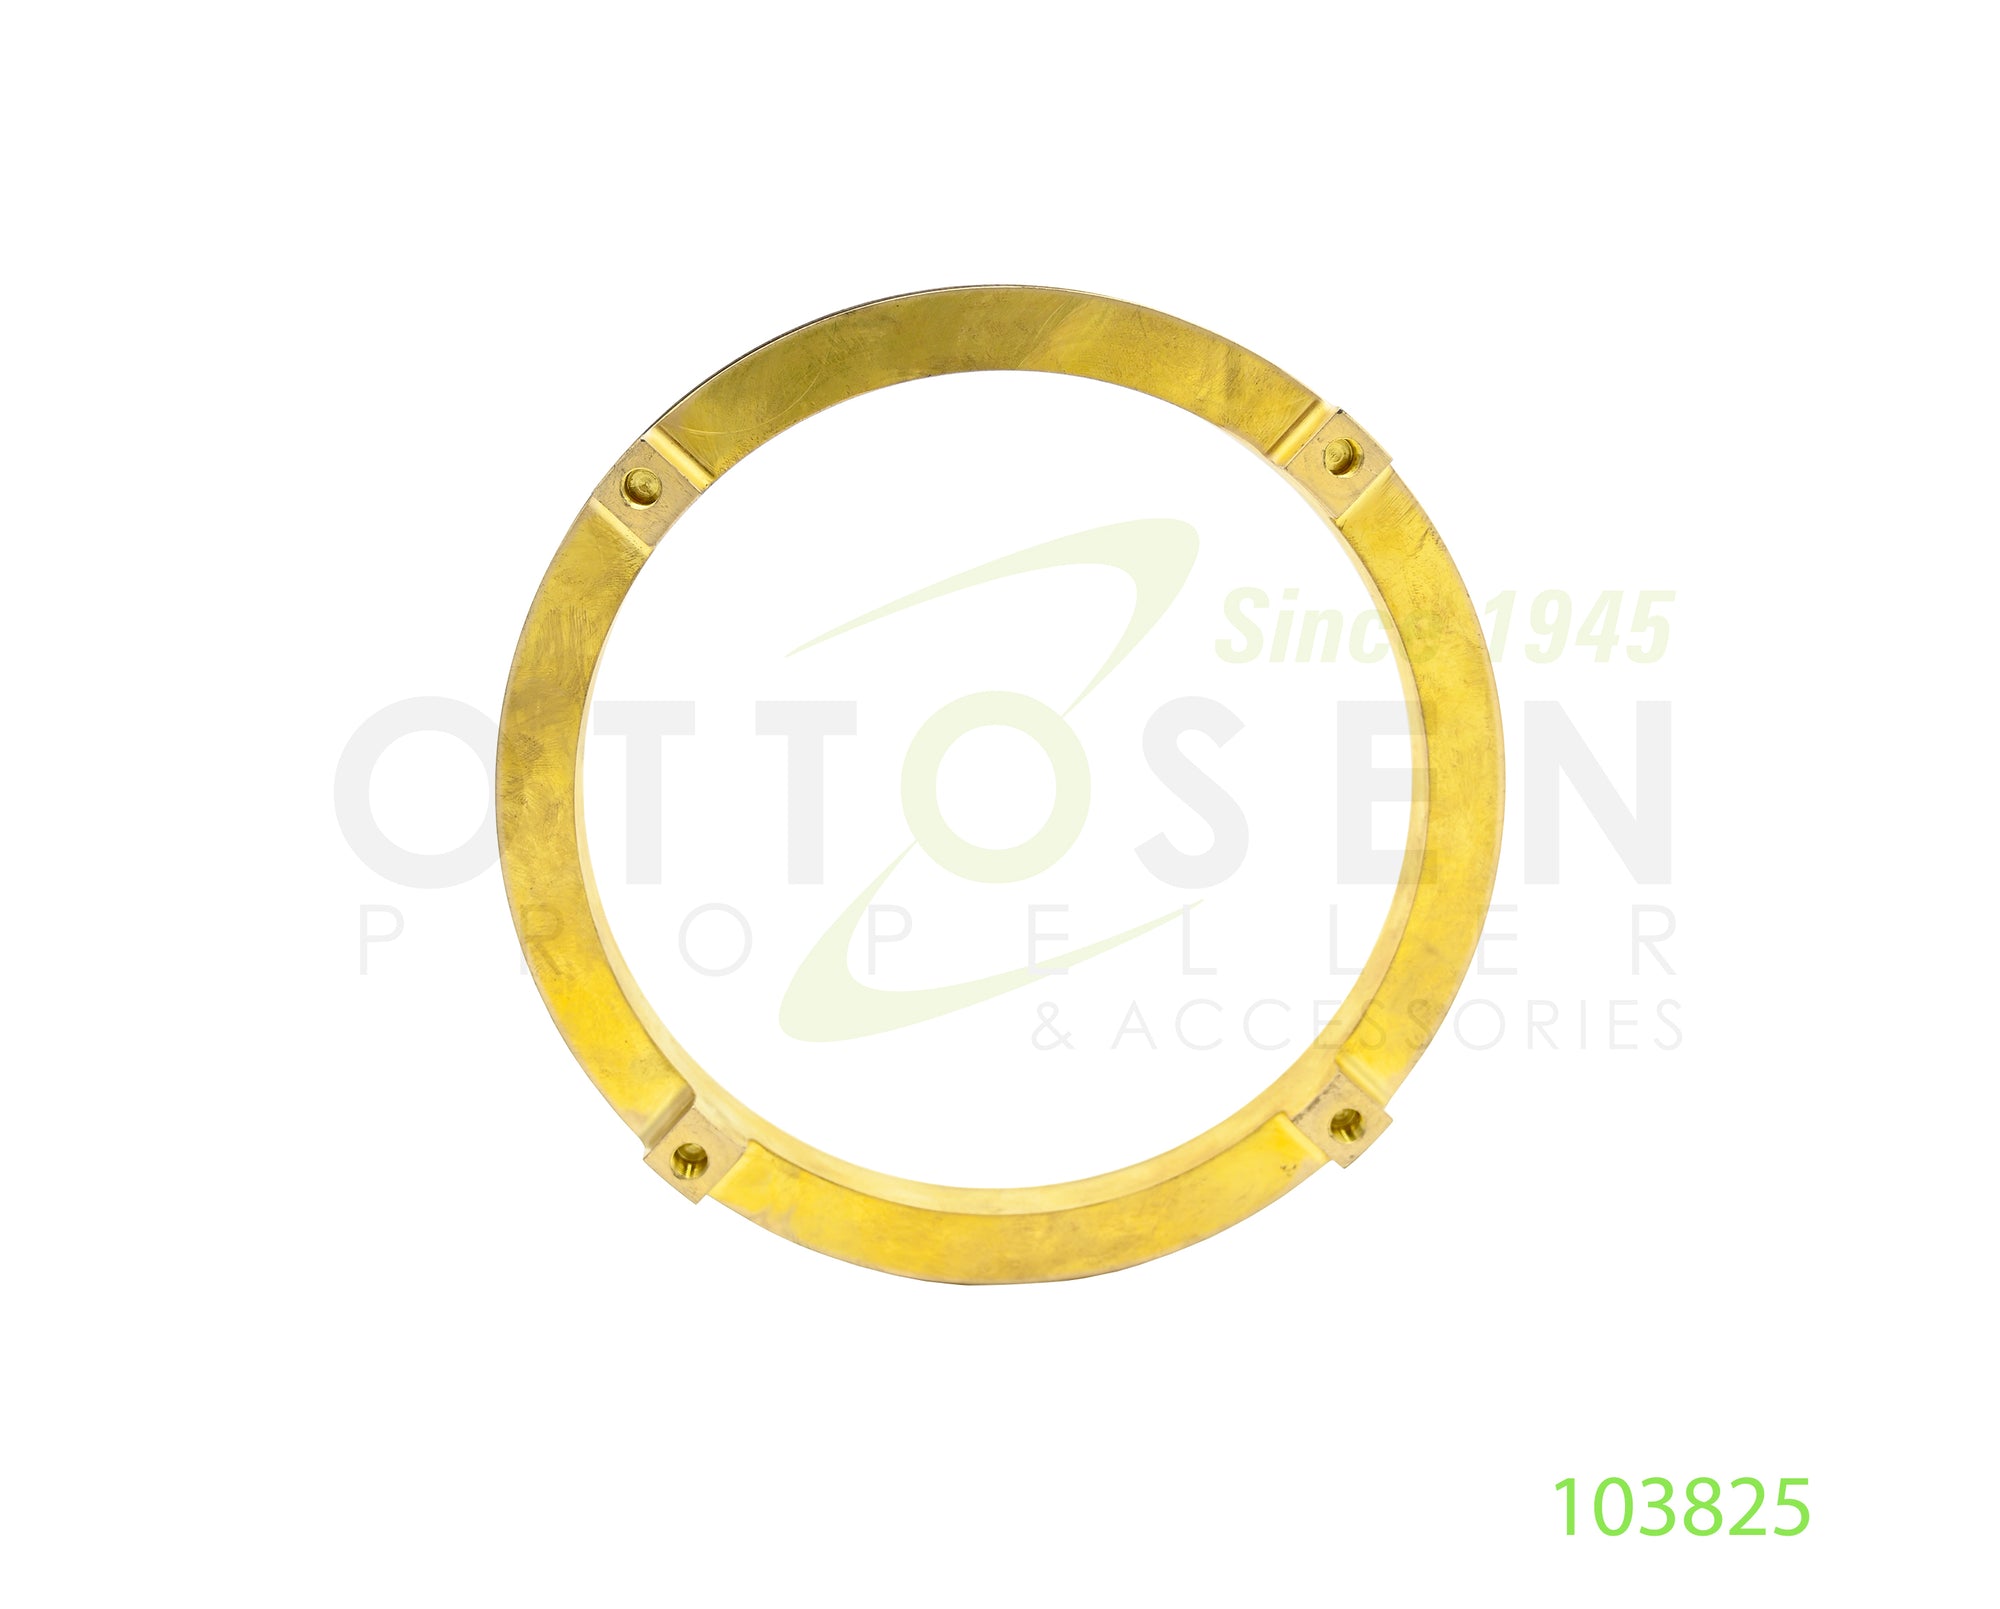 103825-HARTZELL-PROPELLER-BETA-RING-PICTURE-1